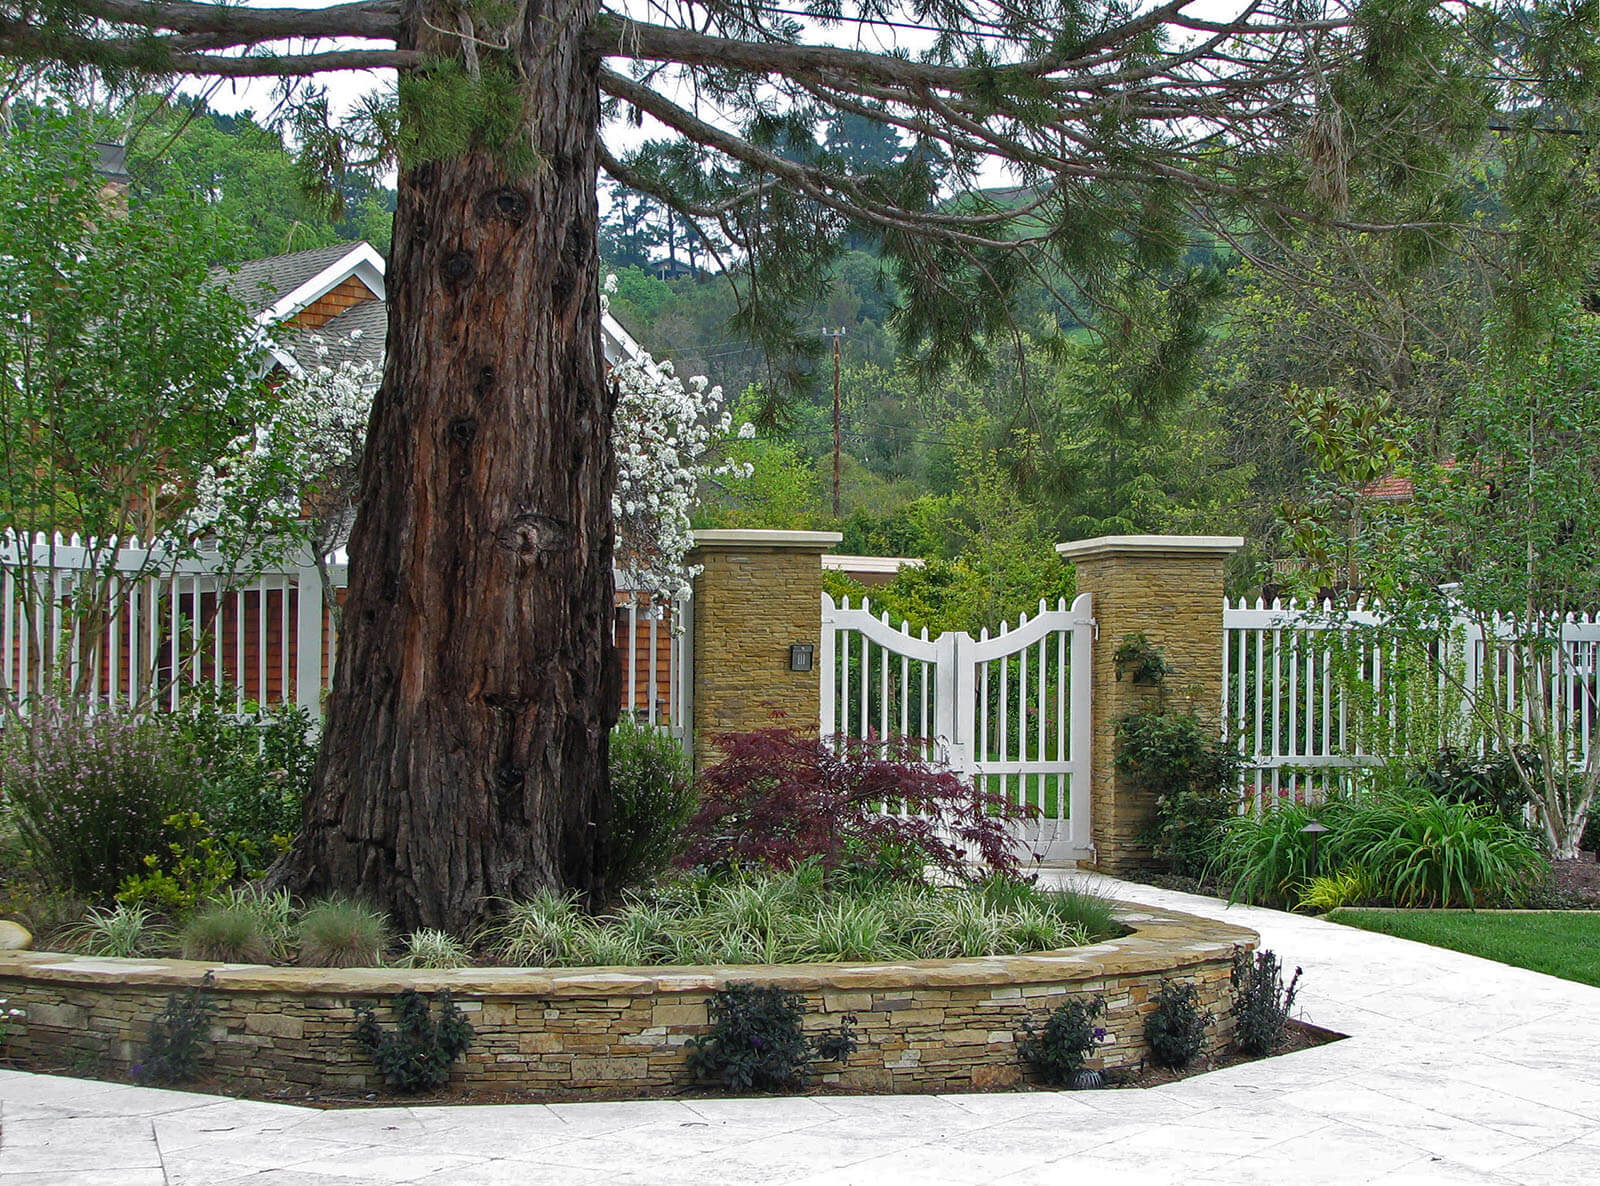 Large cedar tree in raised stone lined grassy bed with surrounding white stone walkway leading to picket fence with stone capped columns